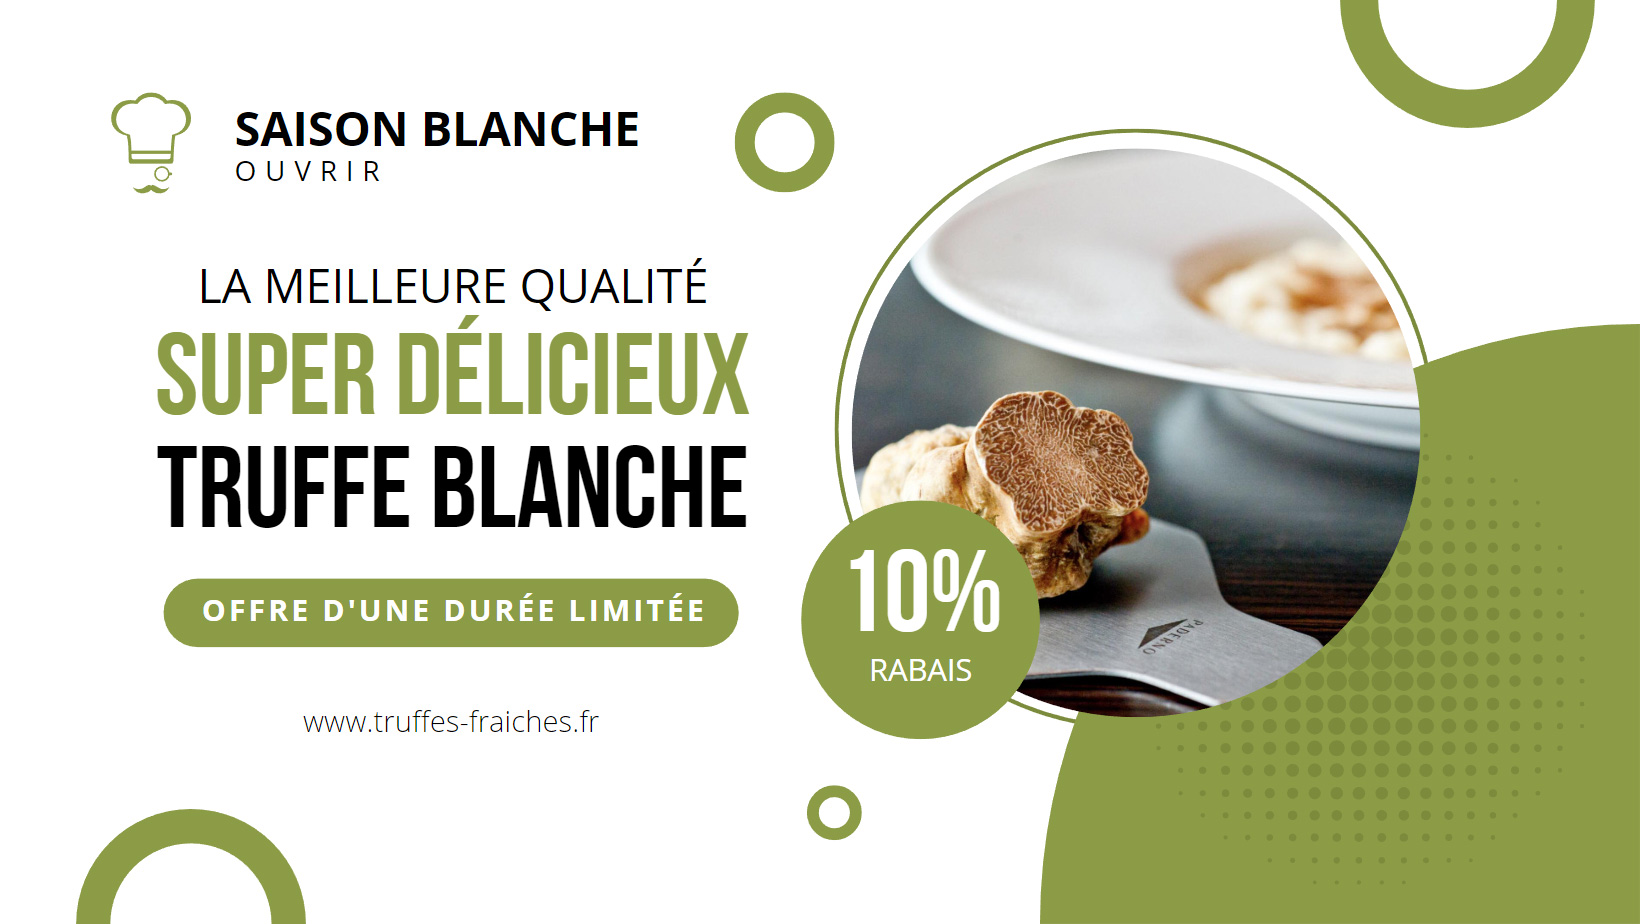 truffes blanches image